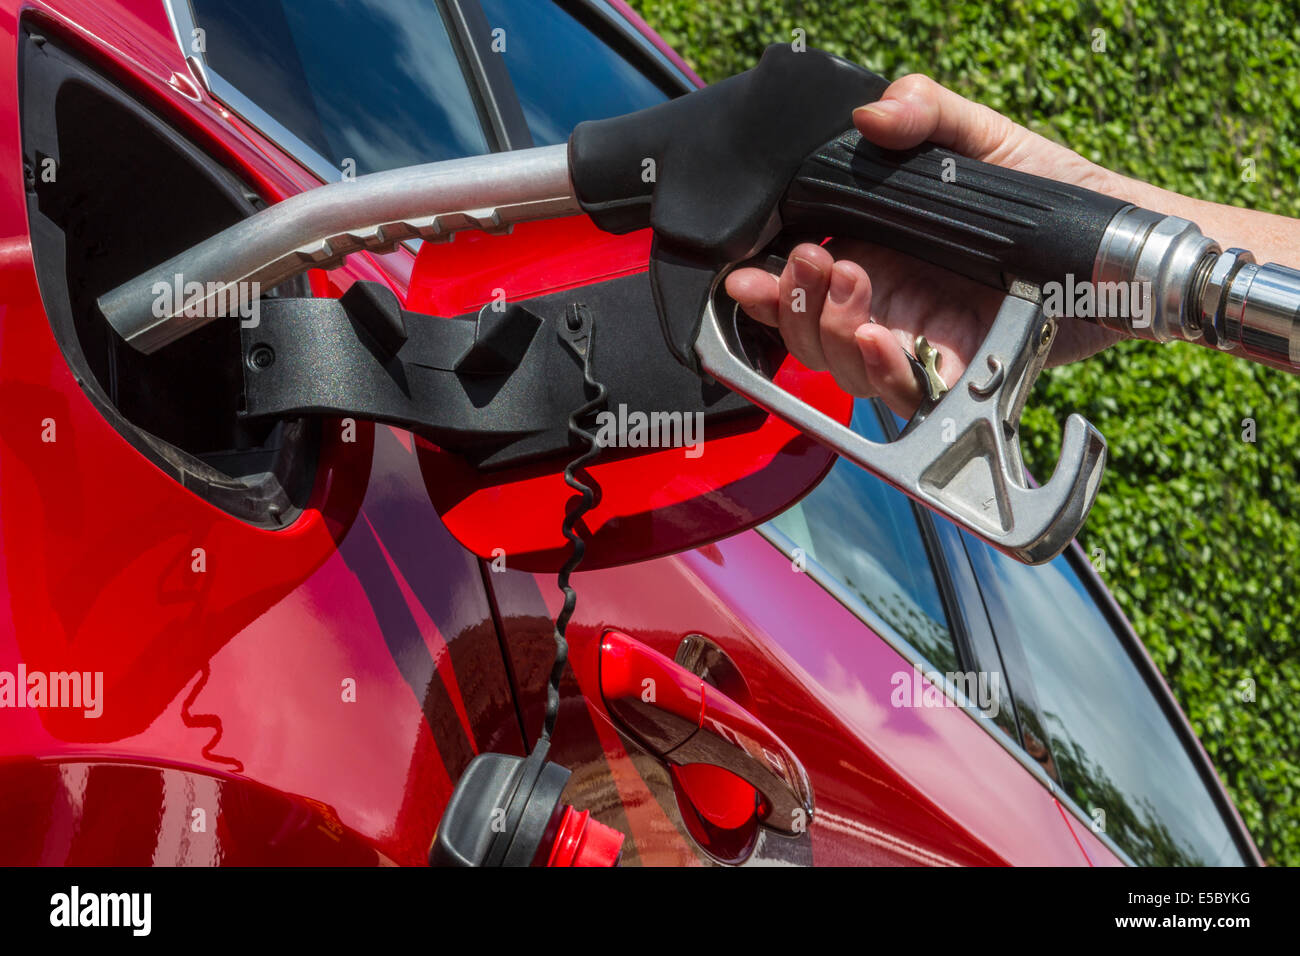 Pumping Gas - Filling a cars fuel tank with diesel. Stock Photo